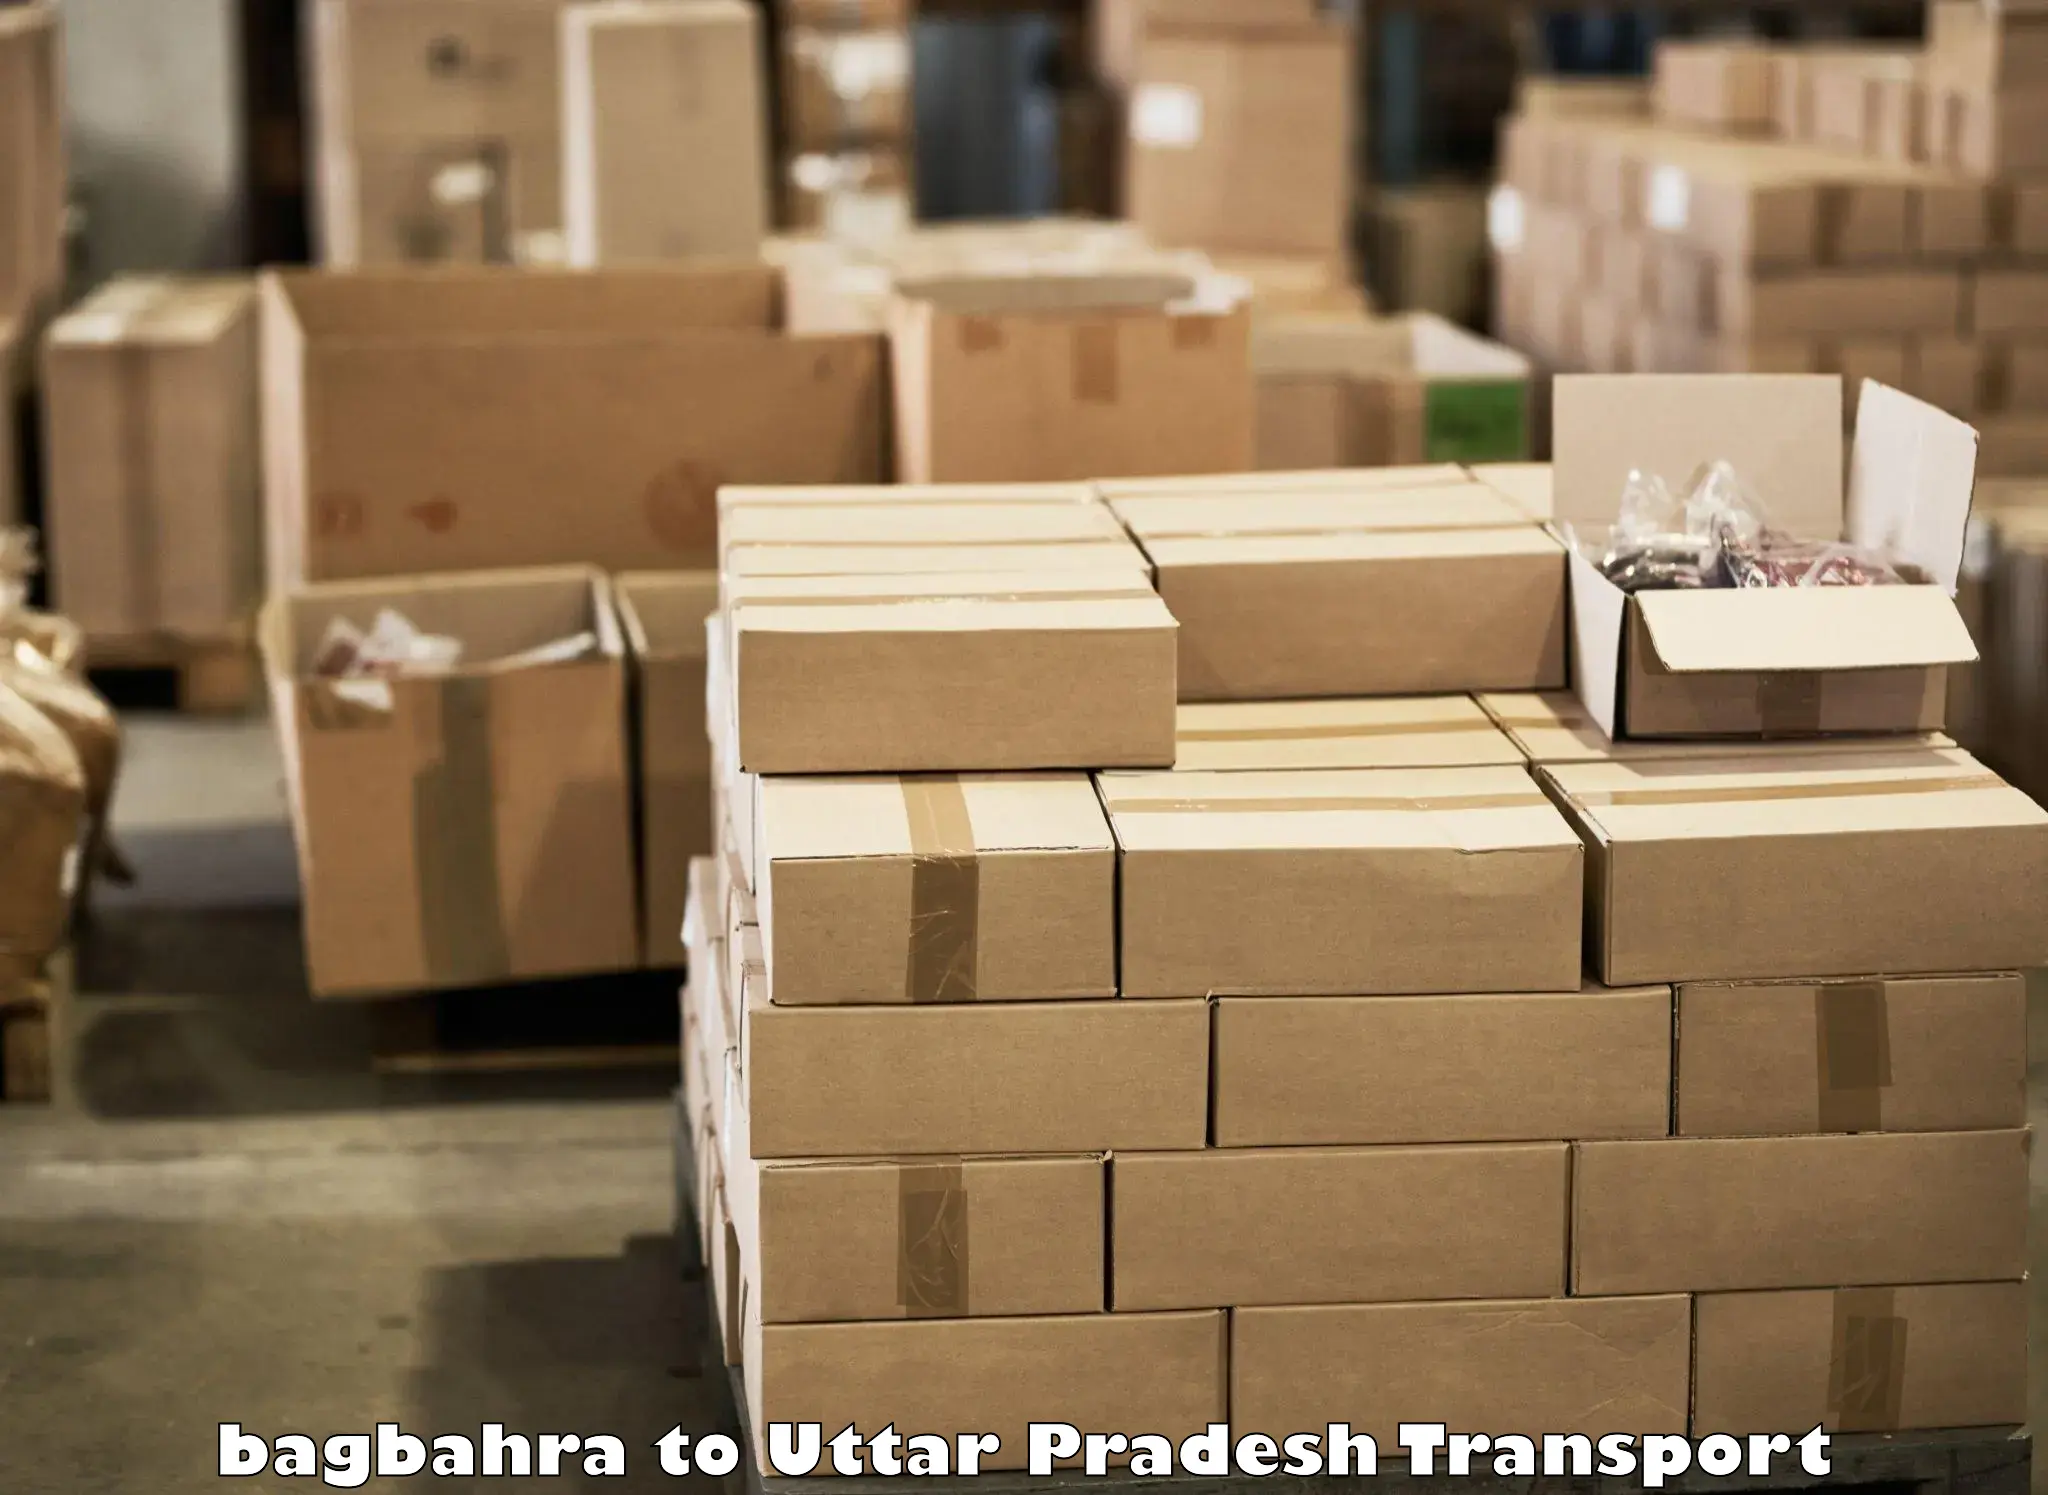 Truck transport companies in India bagbahra to Mirzapur